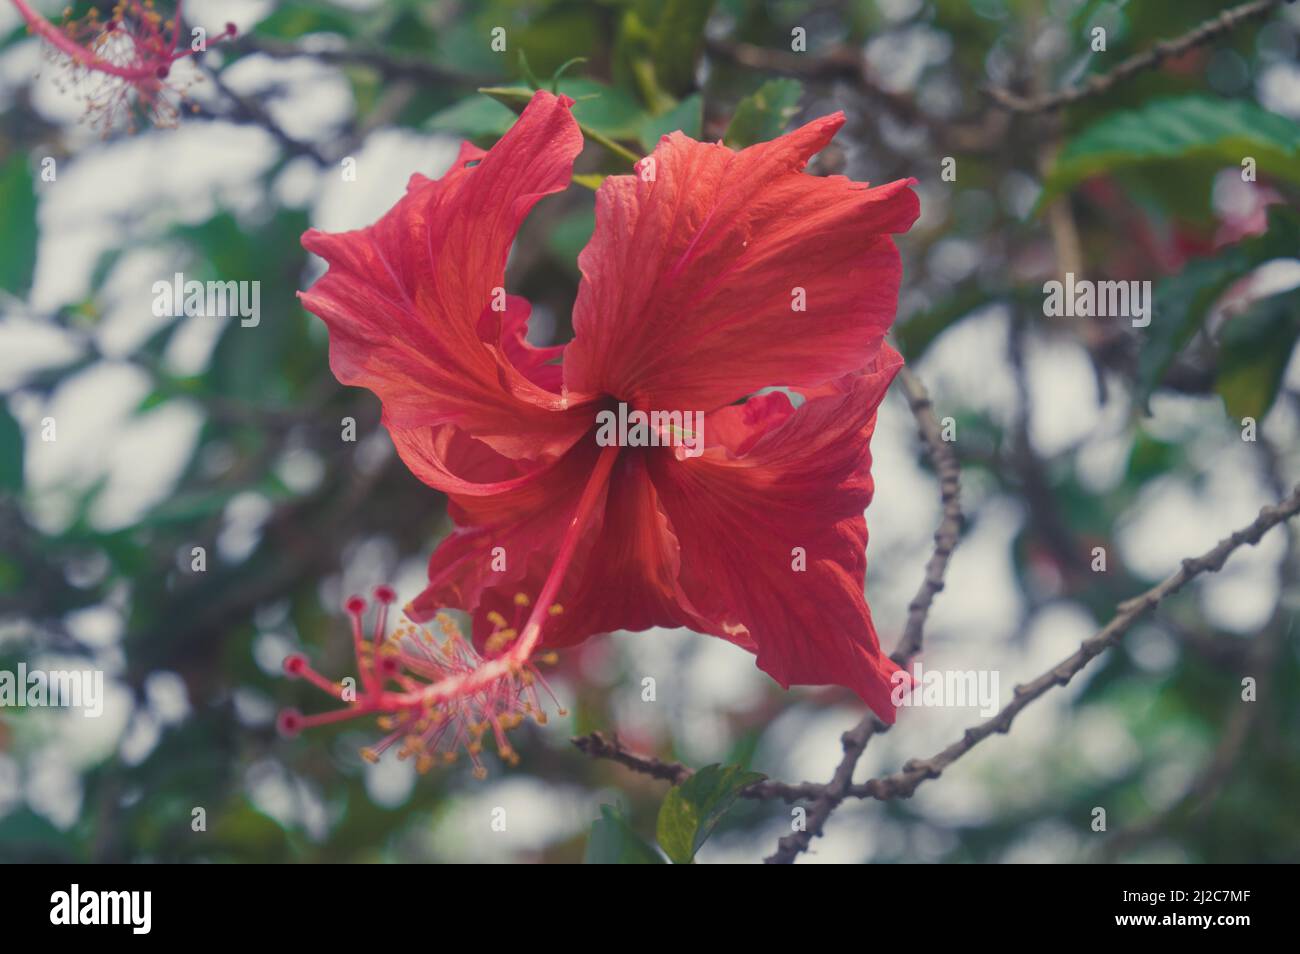 Siam Garden Red Hibiscus Flower or China rose Plant Gudhal Jaba Close Up. Illuminated by sunlight isolated from green leaves background. Stock Photo